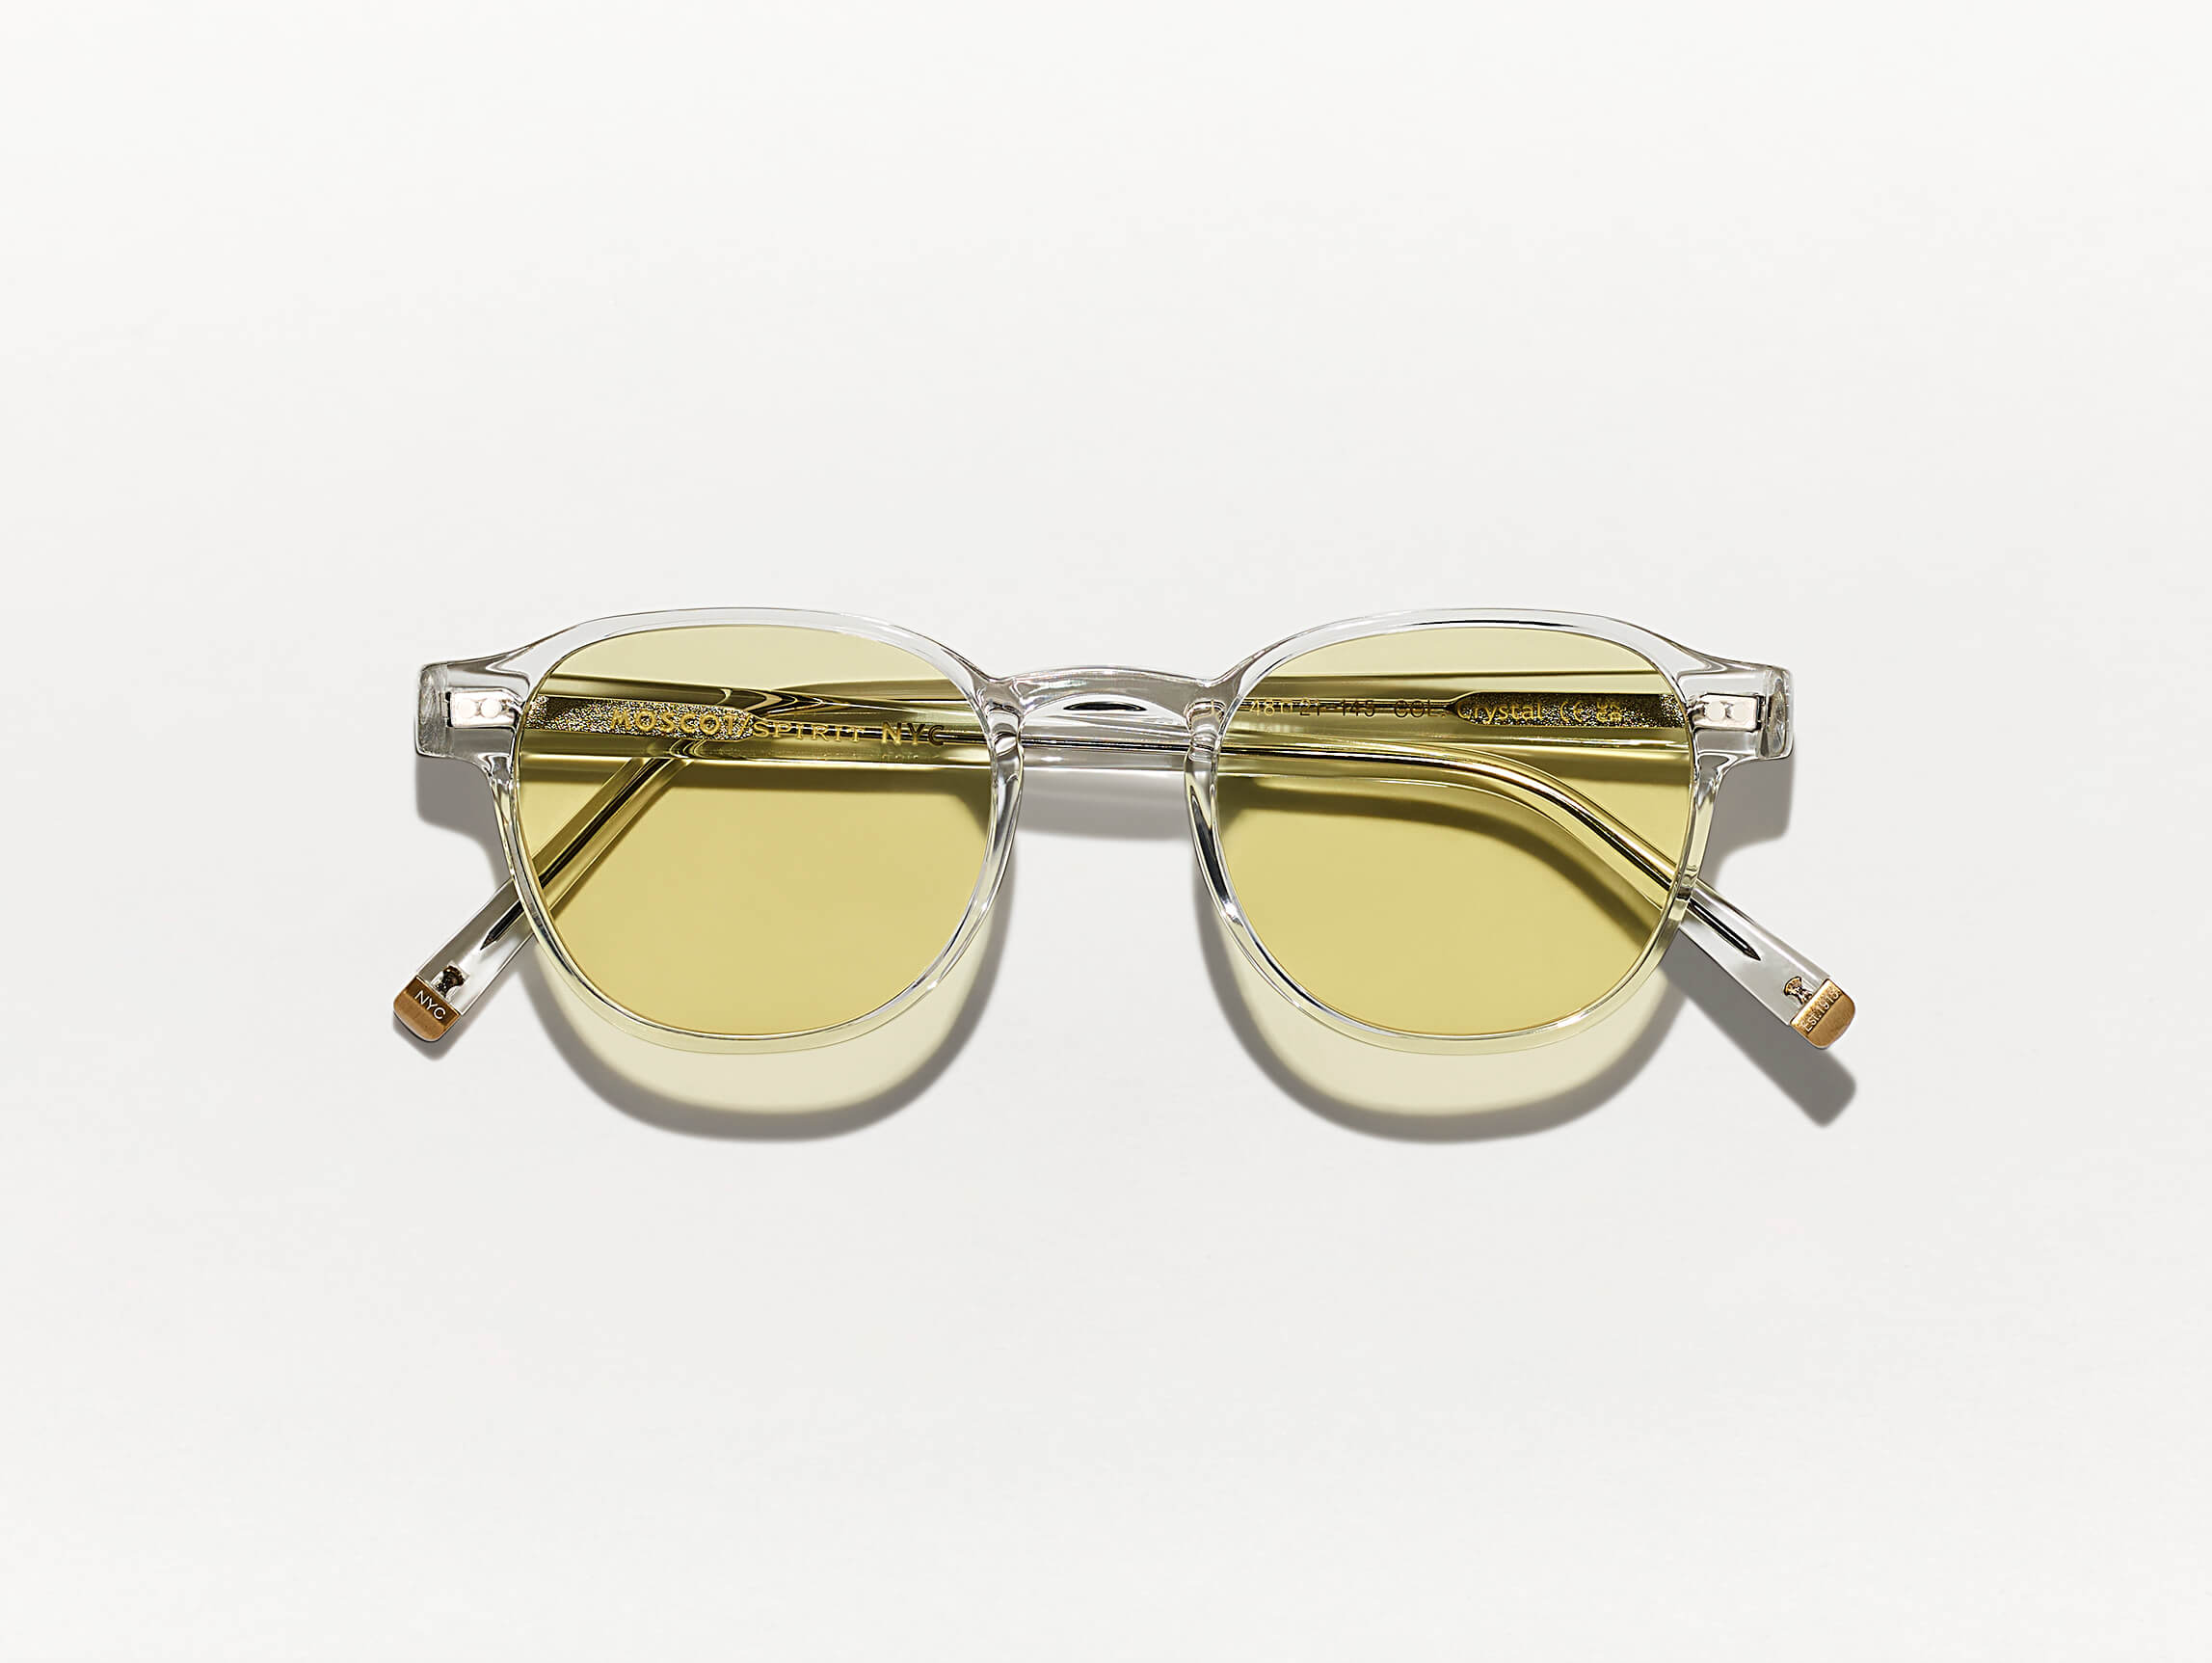 The ARTHUR Pastel with Pastel Yellow Tinted Lenses